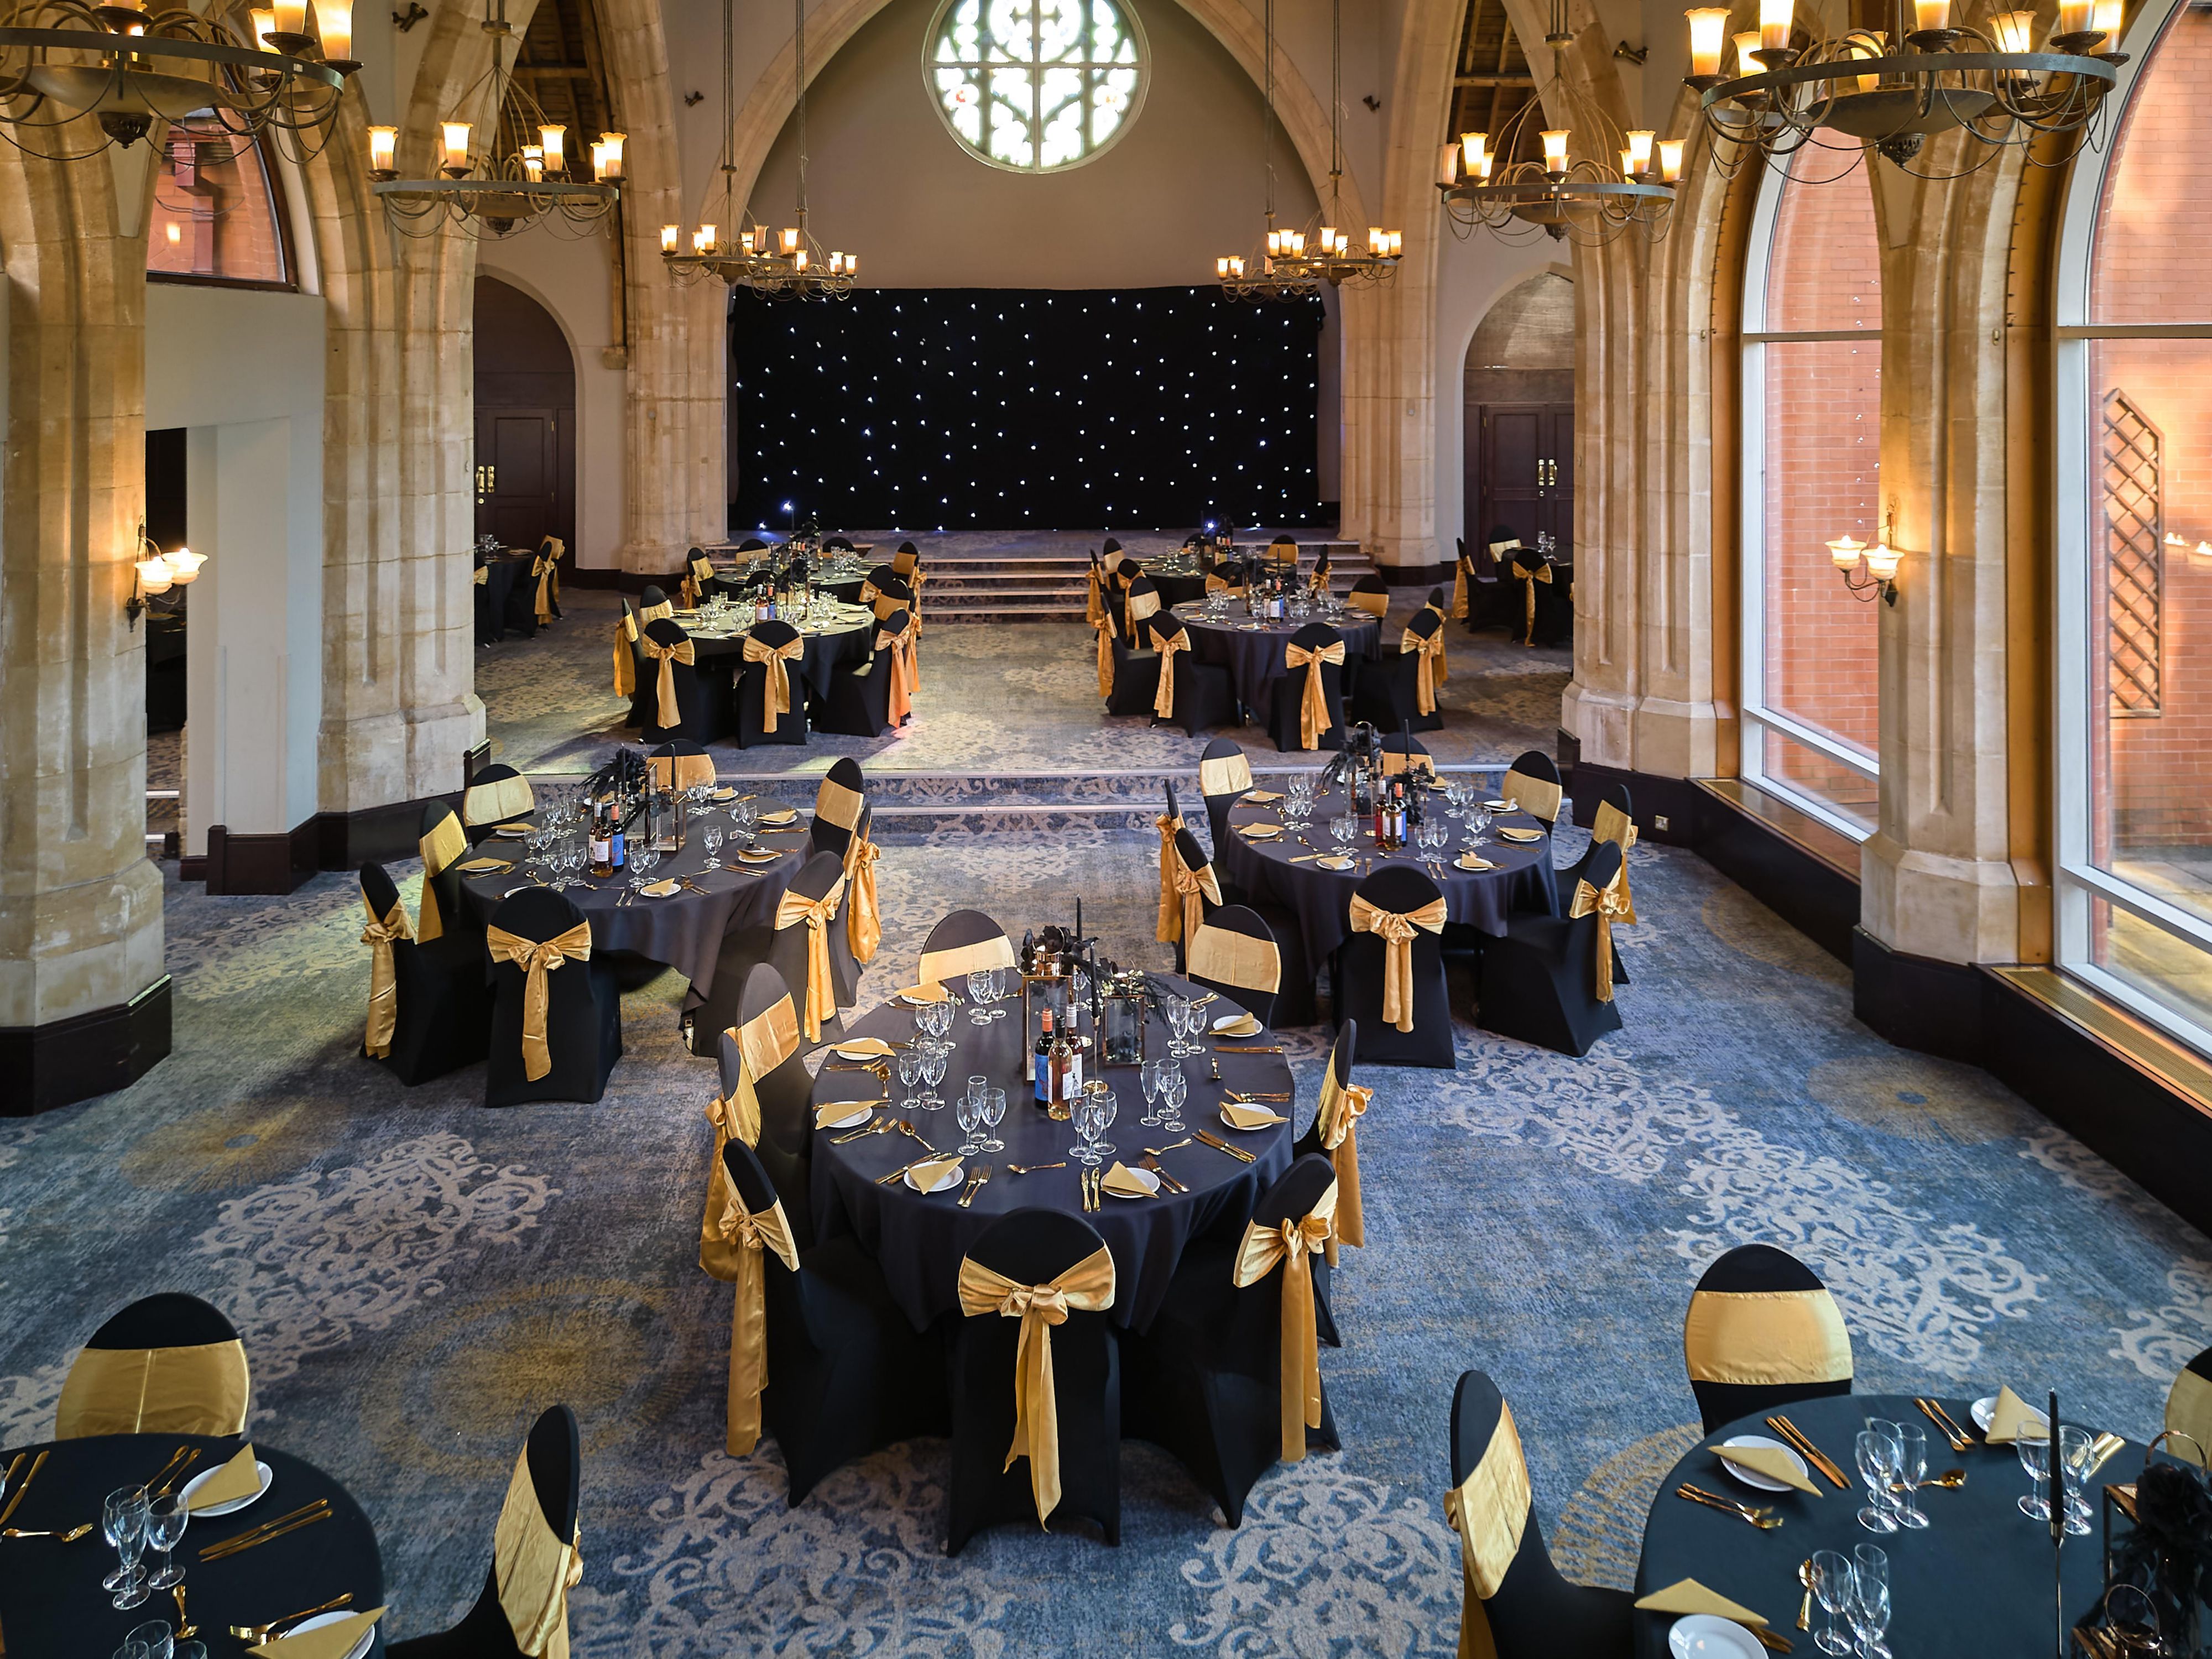 This converted church, with original features such as stained glass windows and majestic arches, is a simply stunning venue for your event. With a large main hall, lounge and bar area, it's a venue that's both magnificent and welcoming to make your event truly memorable.